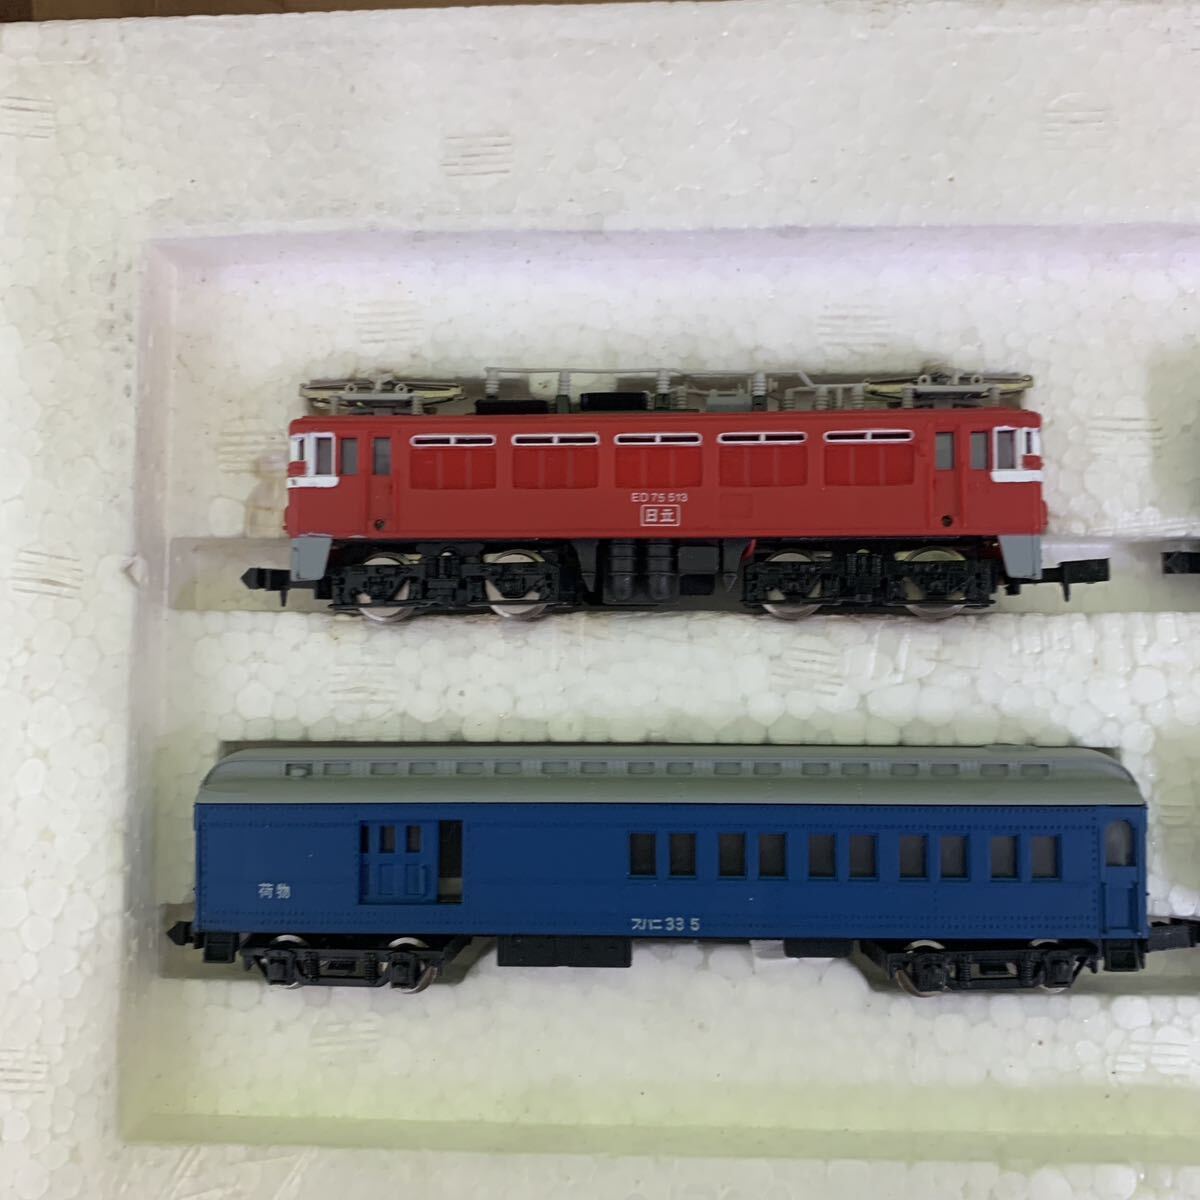 1 jpy ~ Tommy na in scale TOMY NSCALE setC ED75 passenger car set electric locomotive HN-107